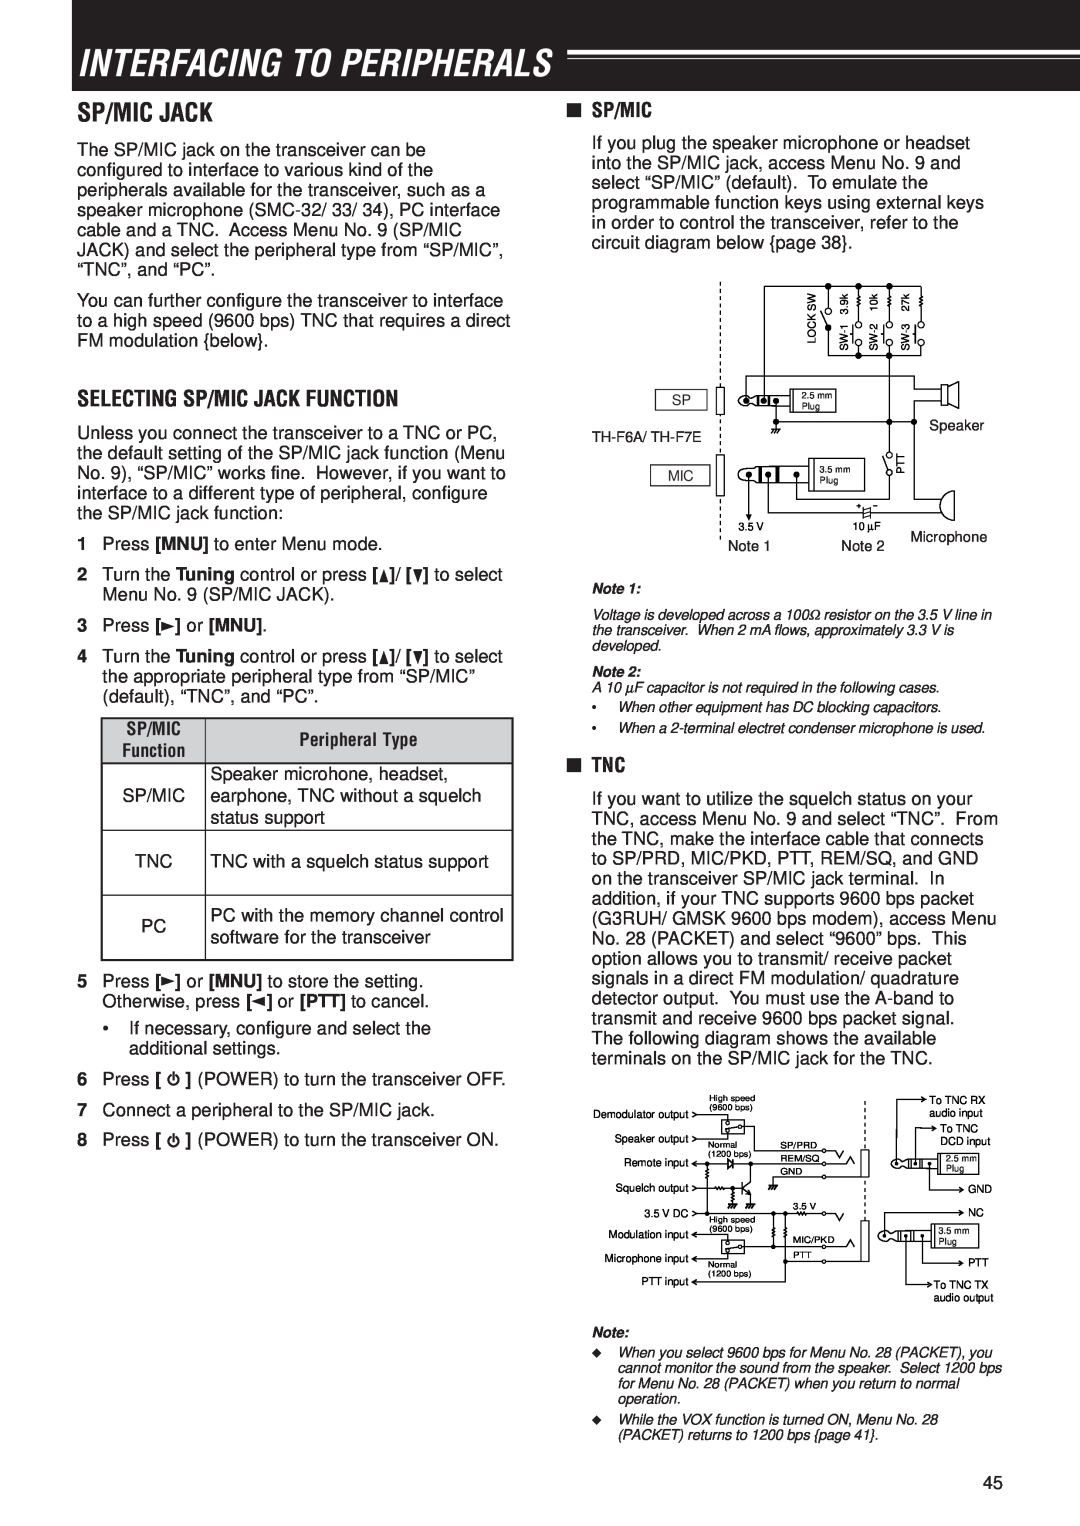 Kenwood TH-F6A, TH-F7E instruction manual Interfacing To Peripherals, Selecting Sp/Mic Jack Function, Peripheral Type 